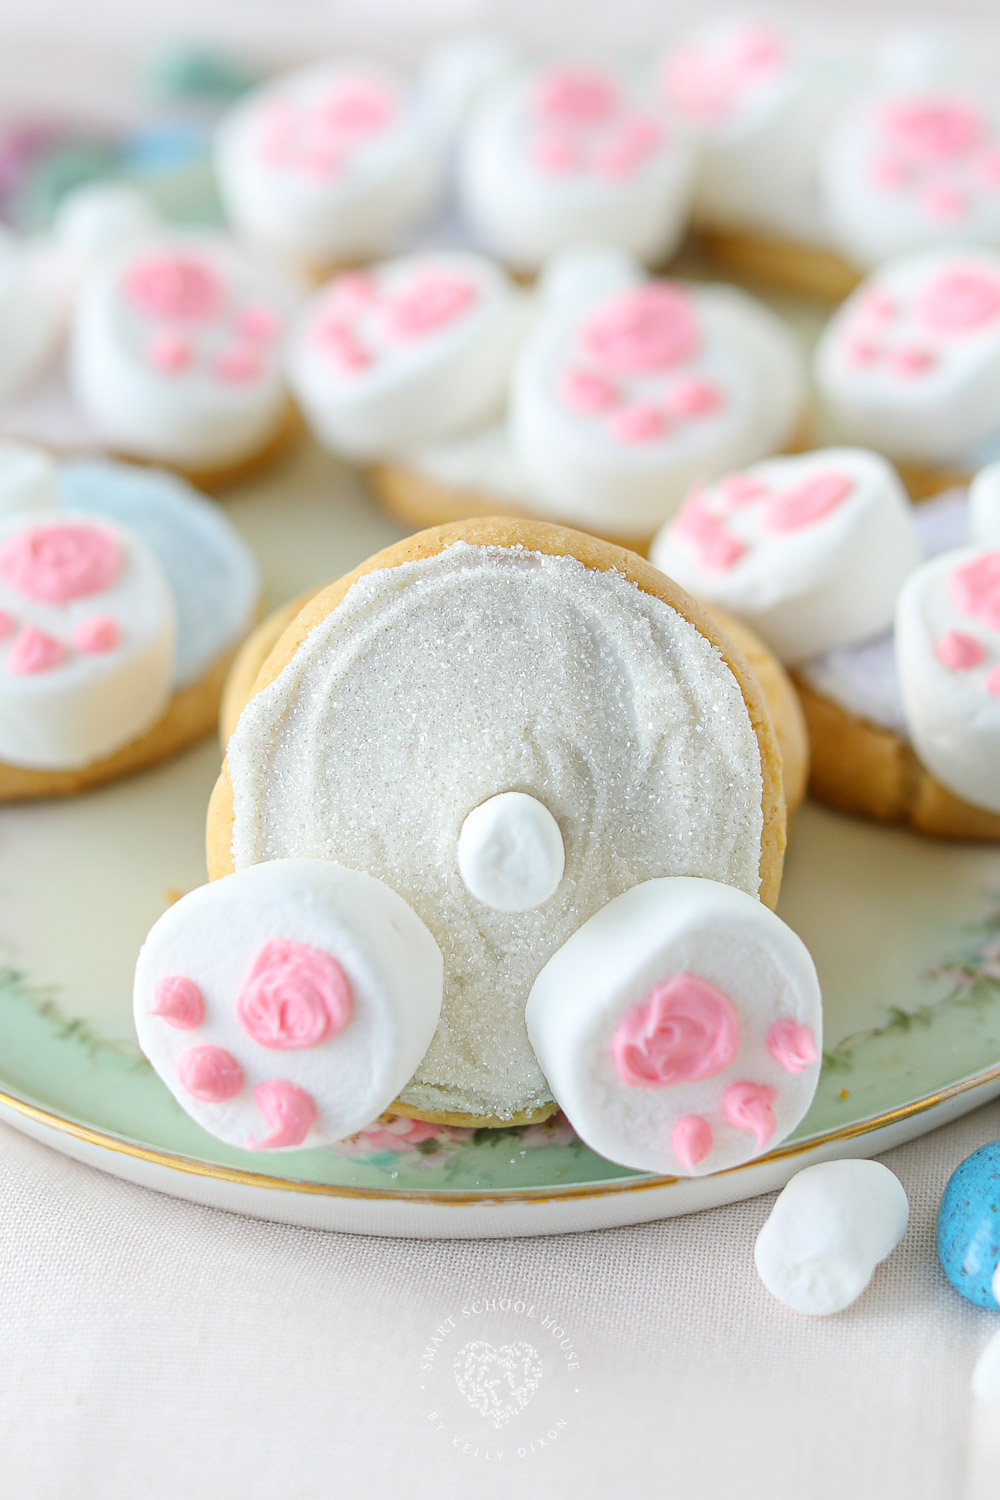 Bunny Butt Cookies are frosted Easter cookies that feature little bunny paws made with marshmallows and a little white marshmallow tail. 